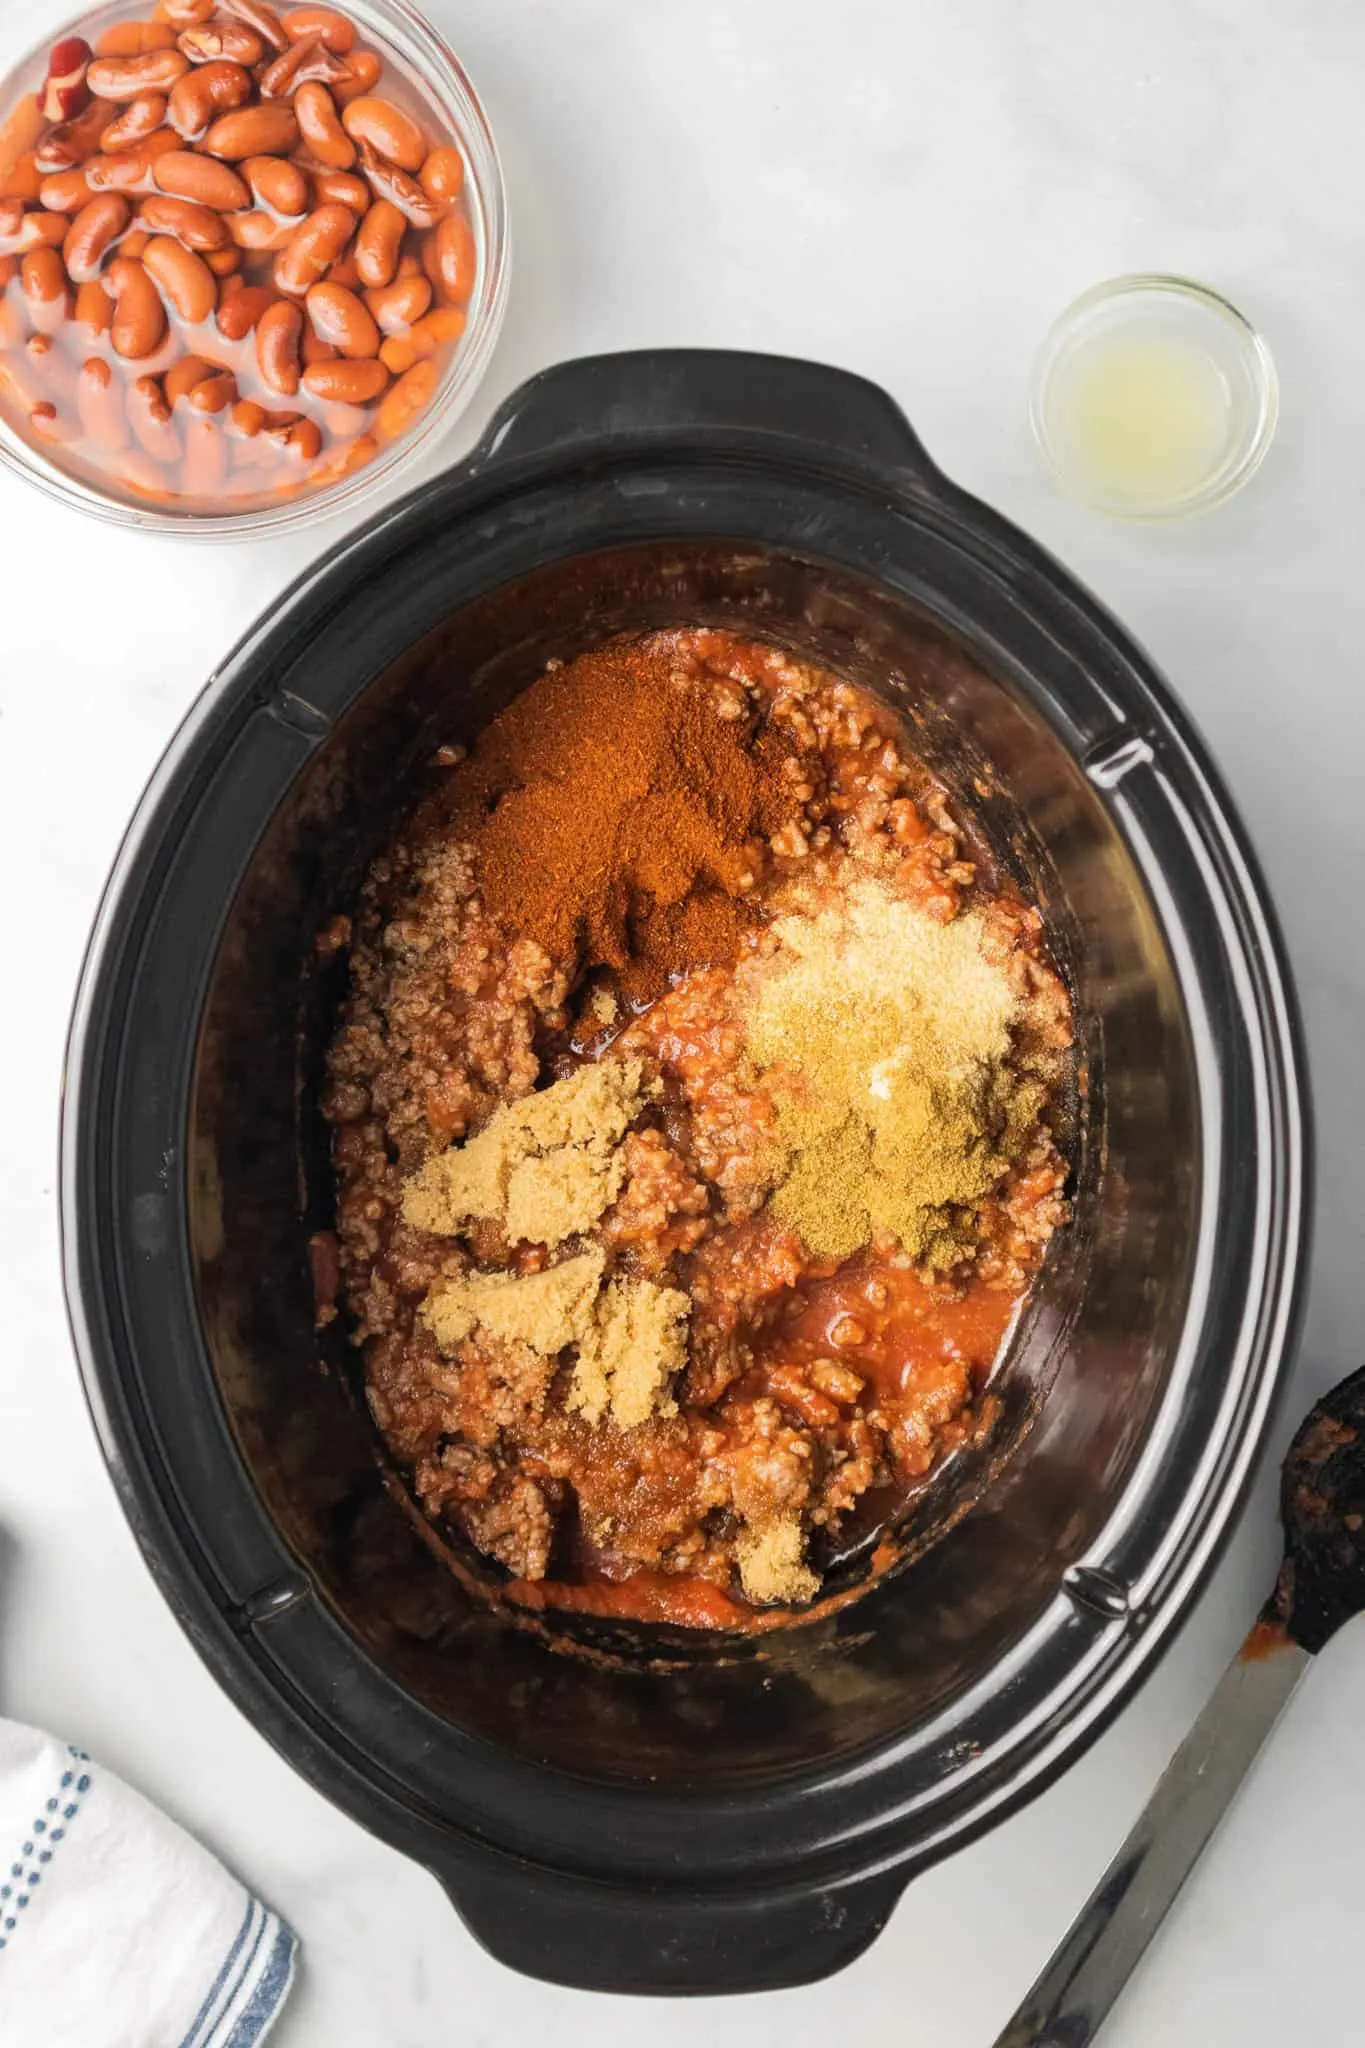 spices, ground beef and tomato sauce in a Crock Pot